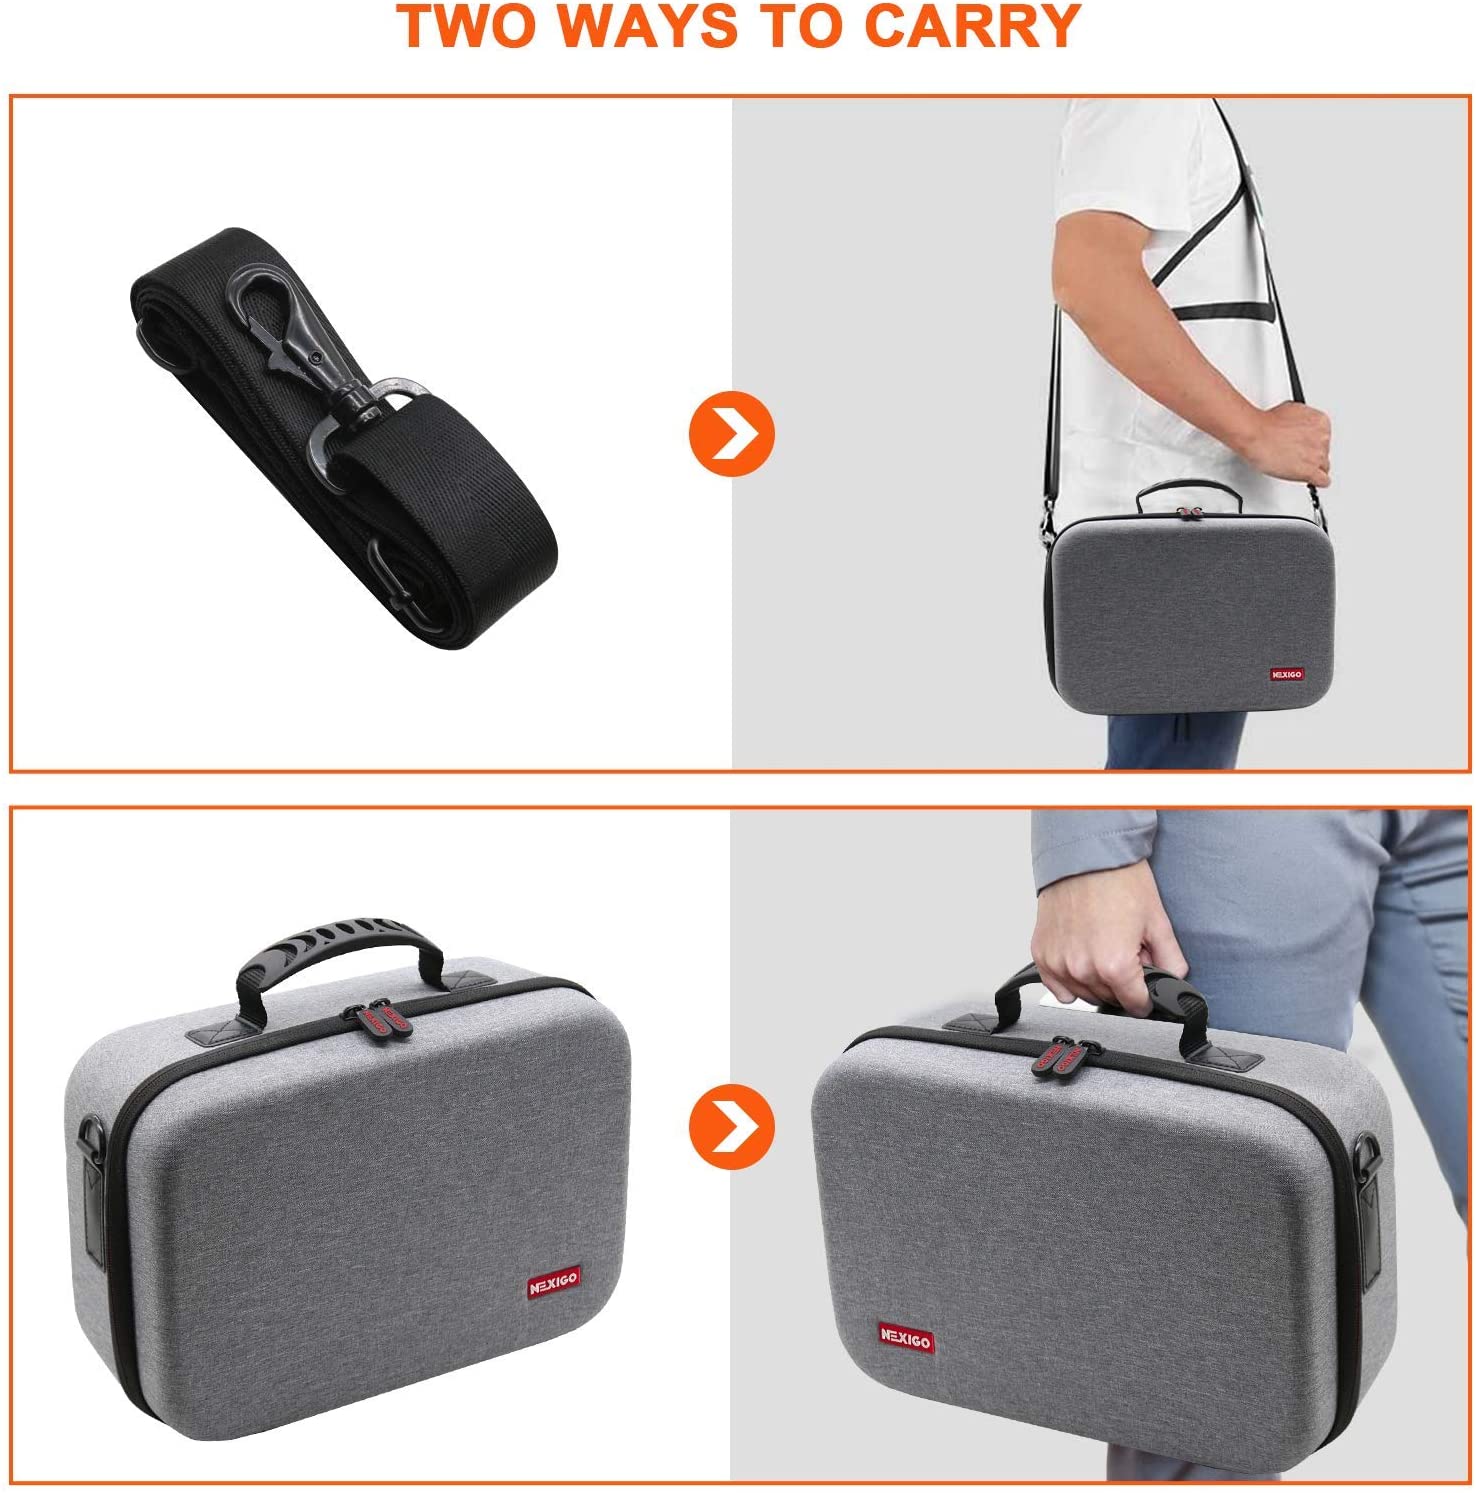 There are two ways to carry the bag: using the shoulder strap to hang it on the shoulder or carrying it by hand.